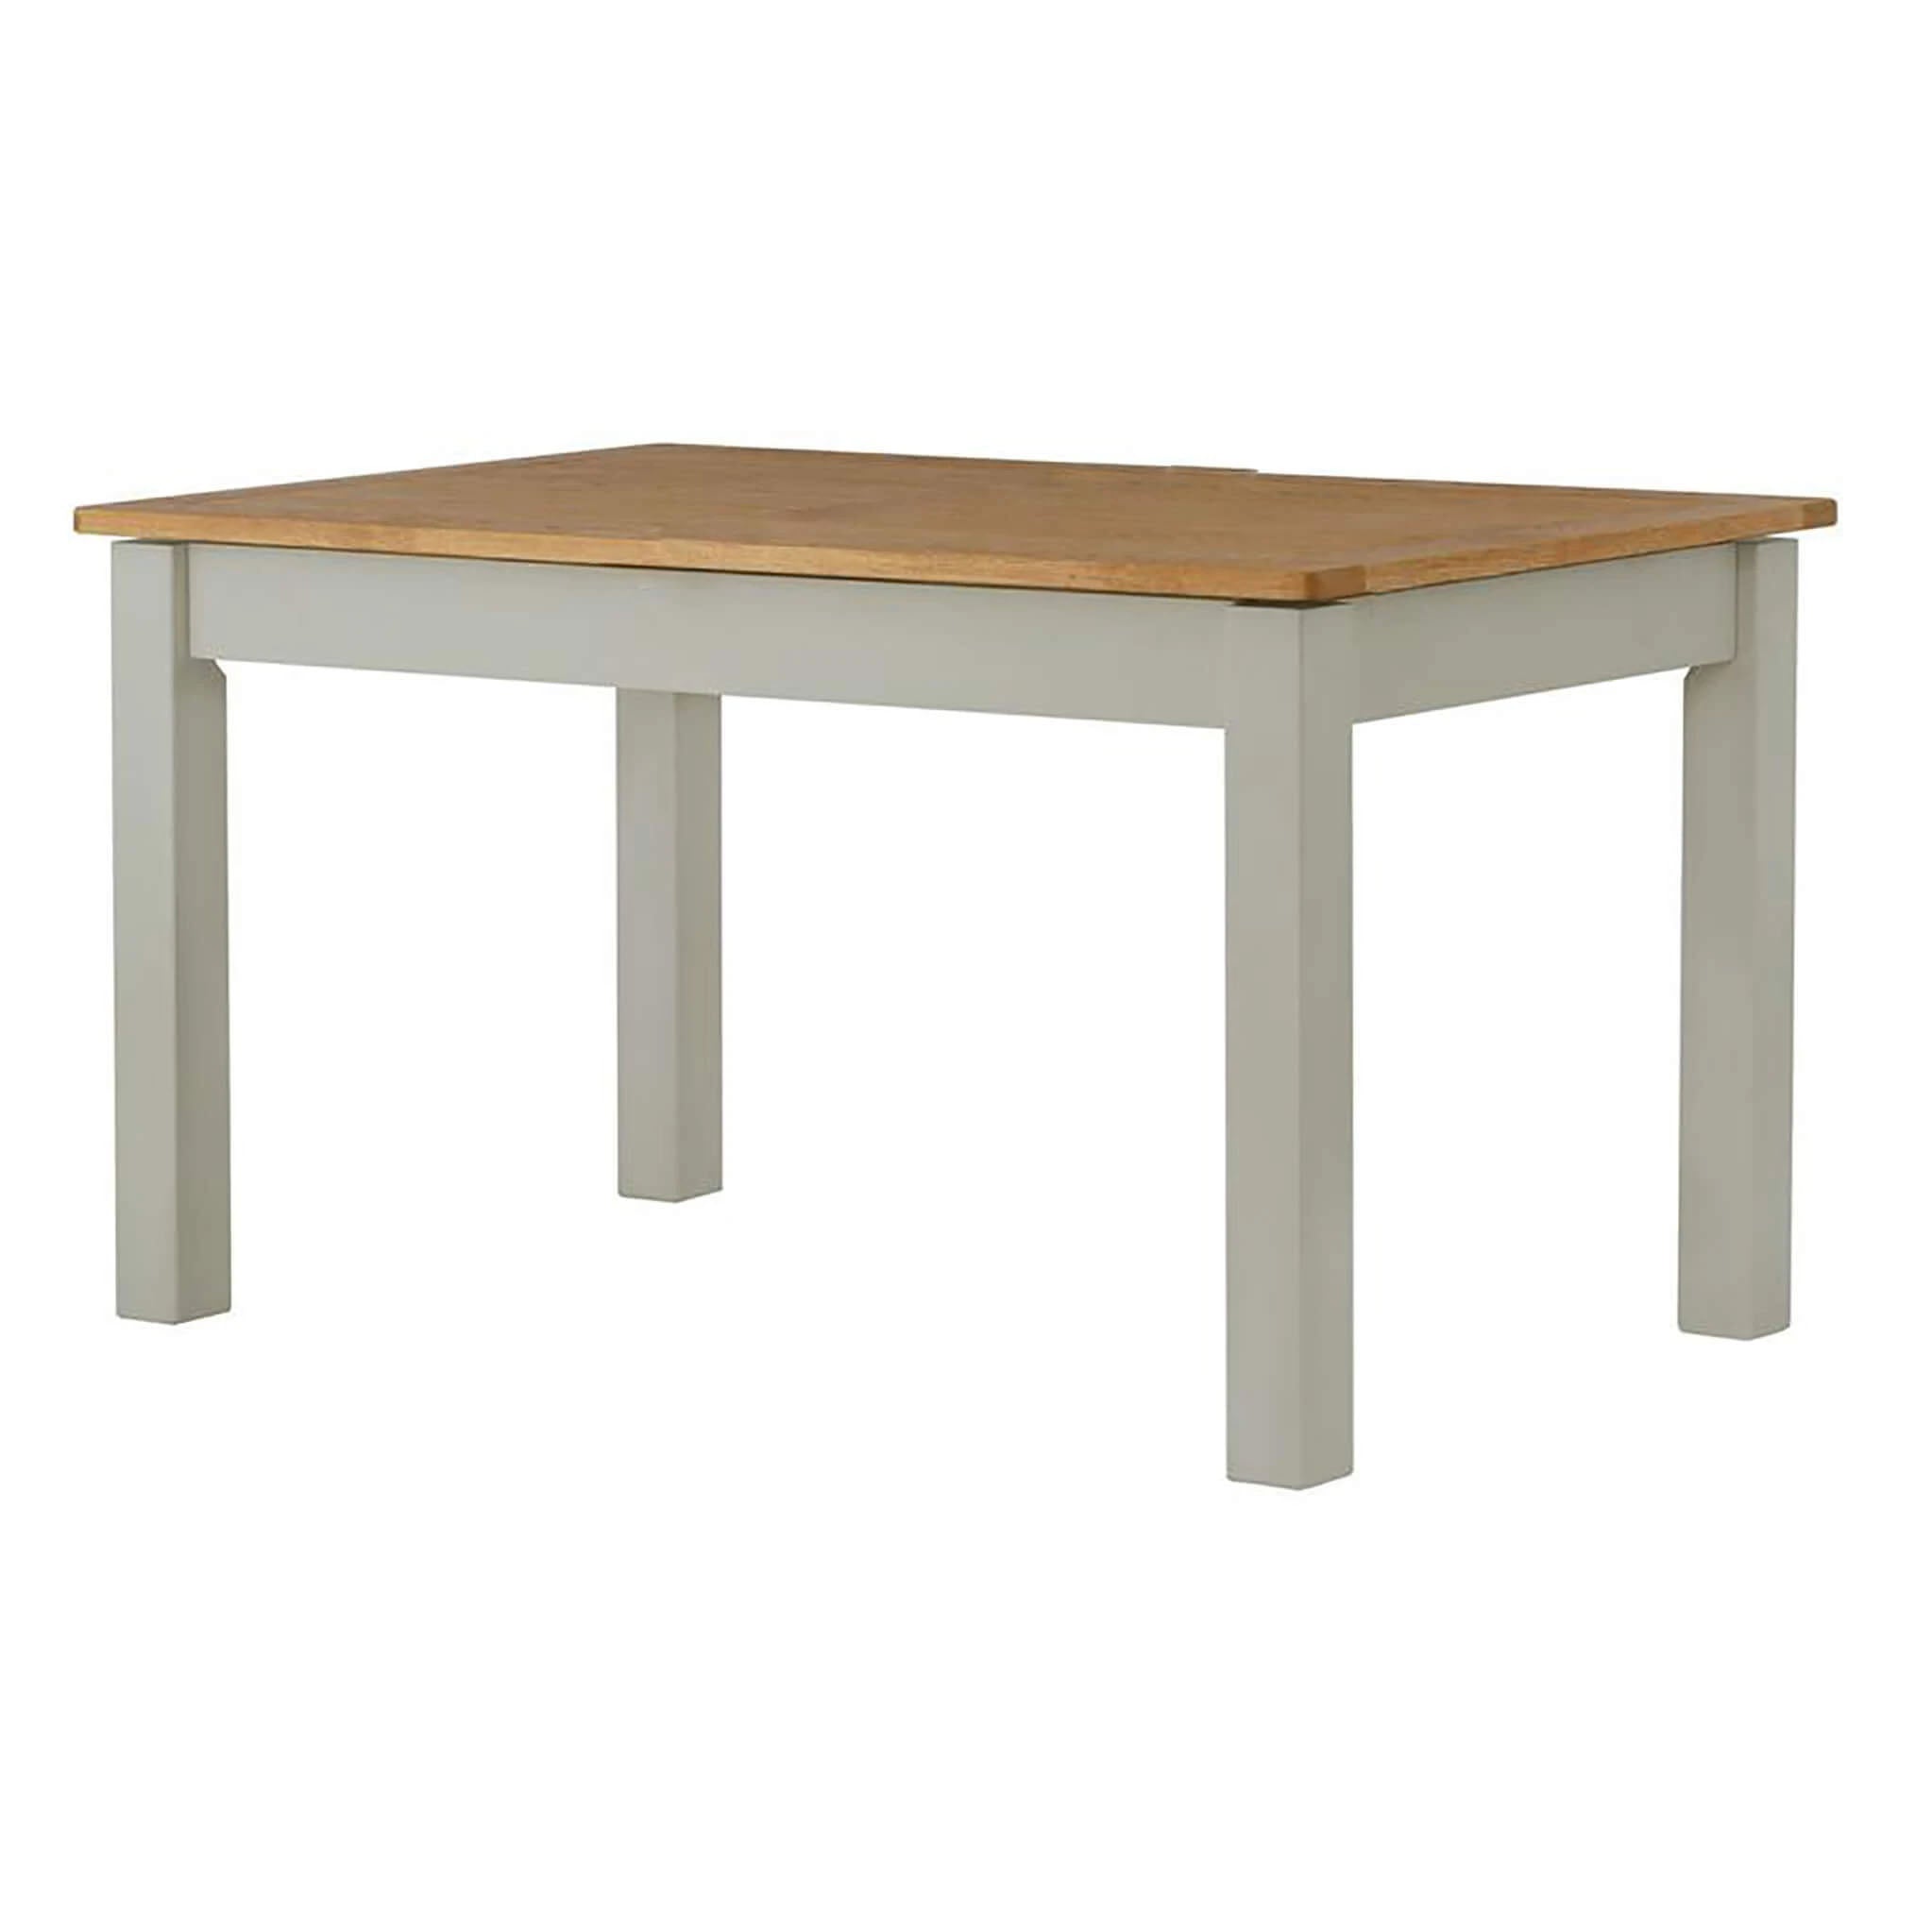 Padstow Grey Small Dining Table W120cm Solid Wood Oak Top